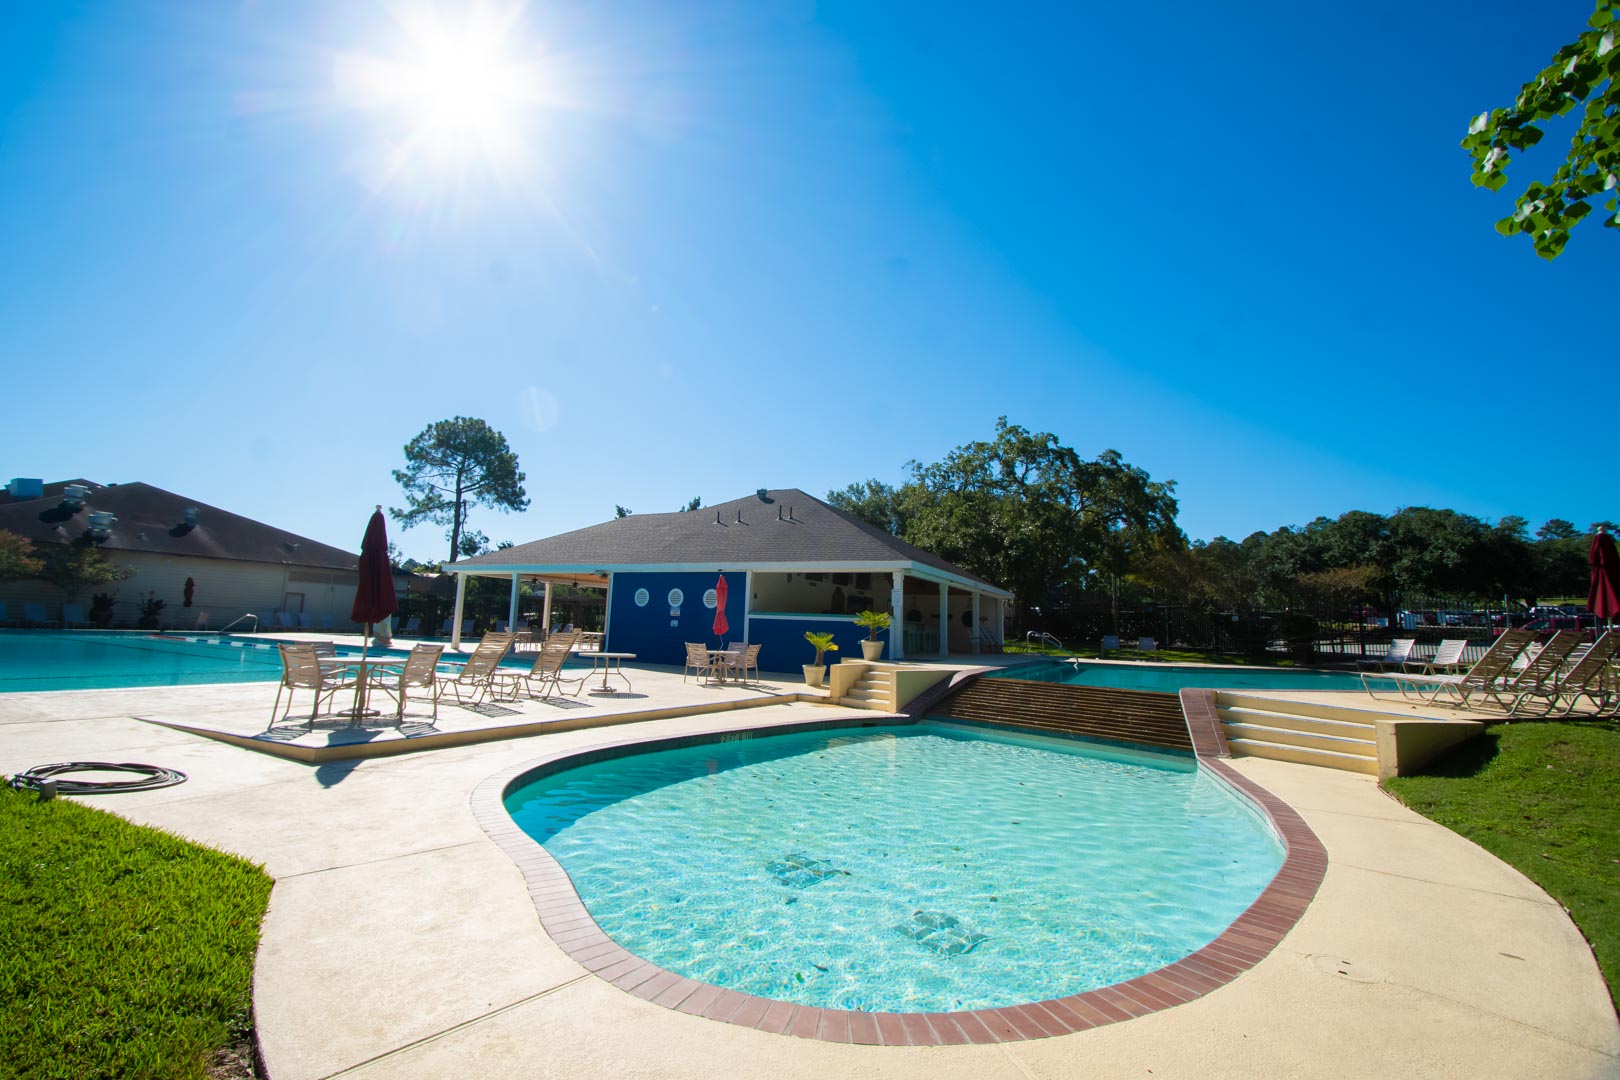 A spacious outdoor swimming pool at VRI's Sweetwater at Lake Conroe in Montgomery, TX.